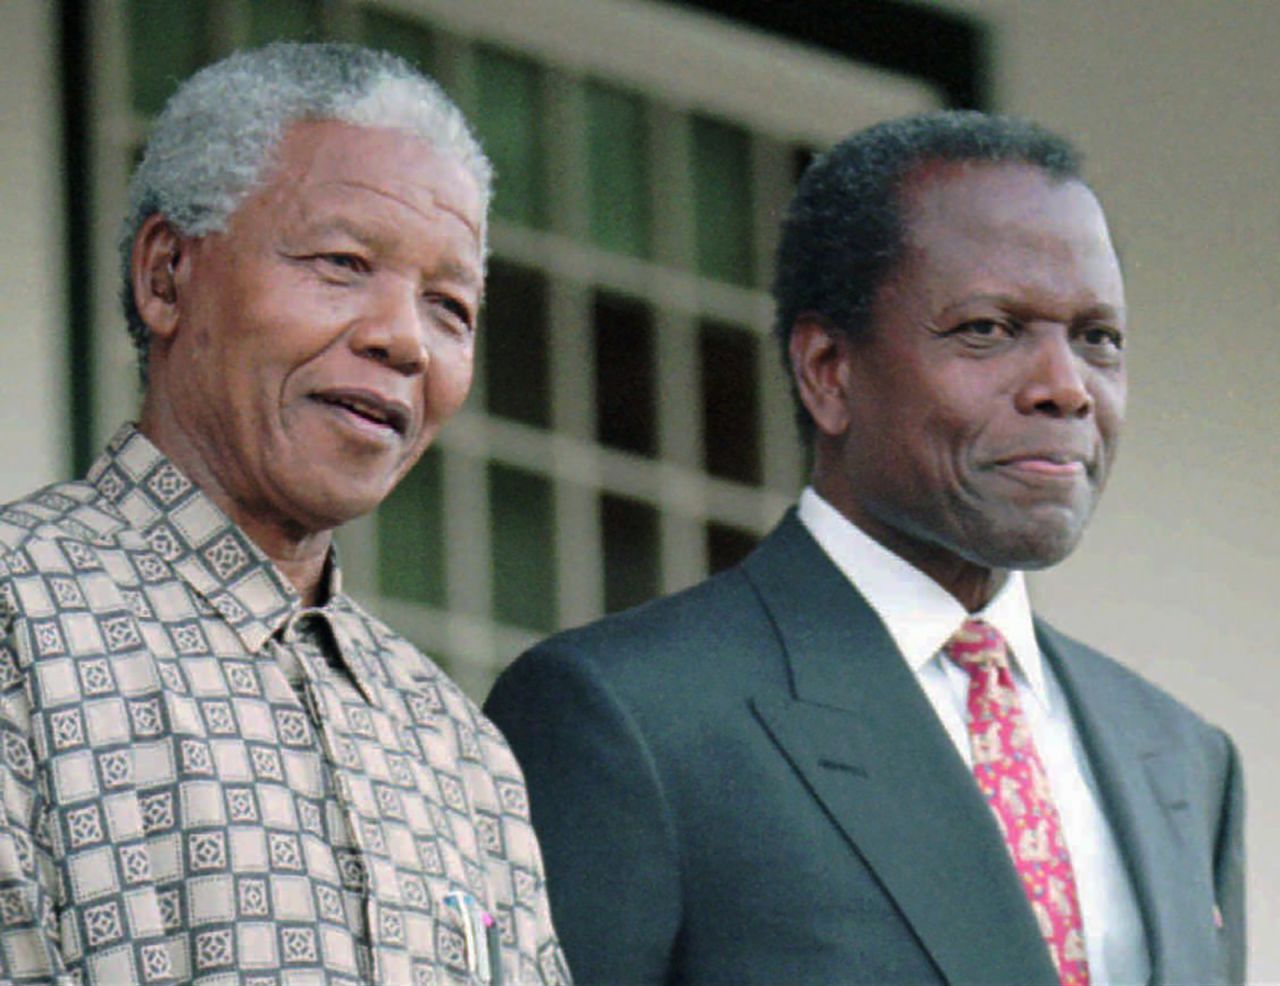 South African President Nelson Mandela stands next to Poitier at a news conference in Cape Town, South Africa, in 1996. Poitier played Mandela in the film "Mandela and de Klerk."